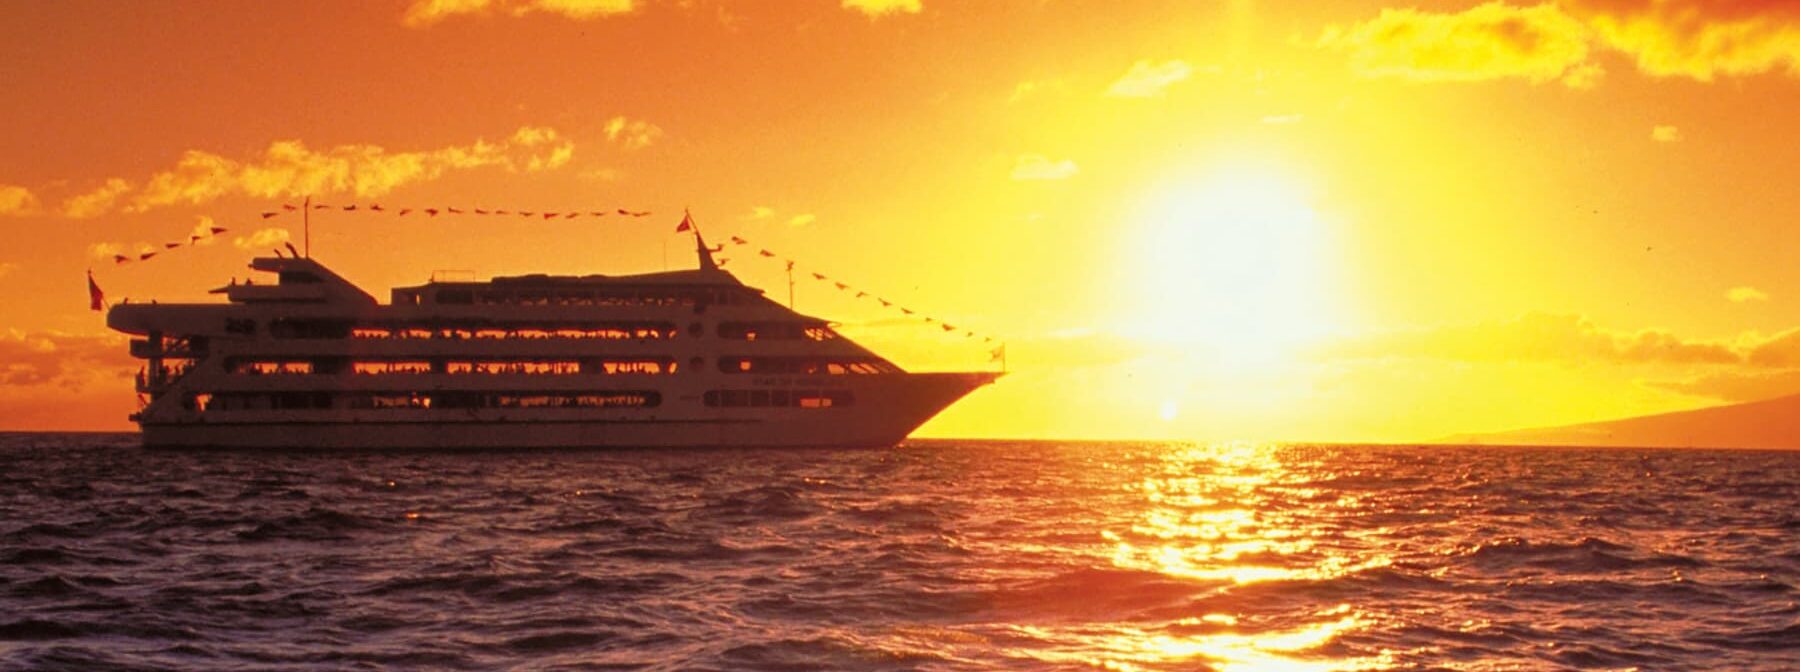 The Star of Honolulu dinner cruise with sunset in the background